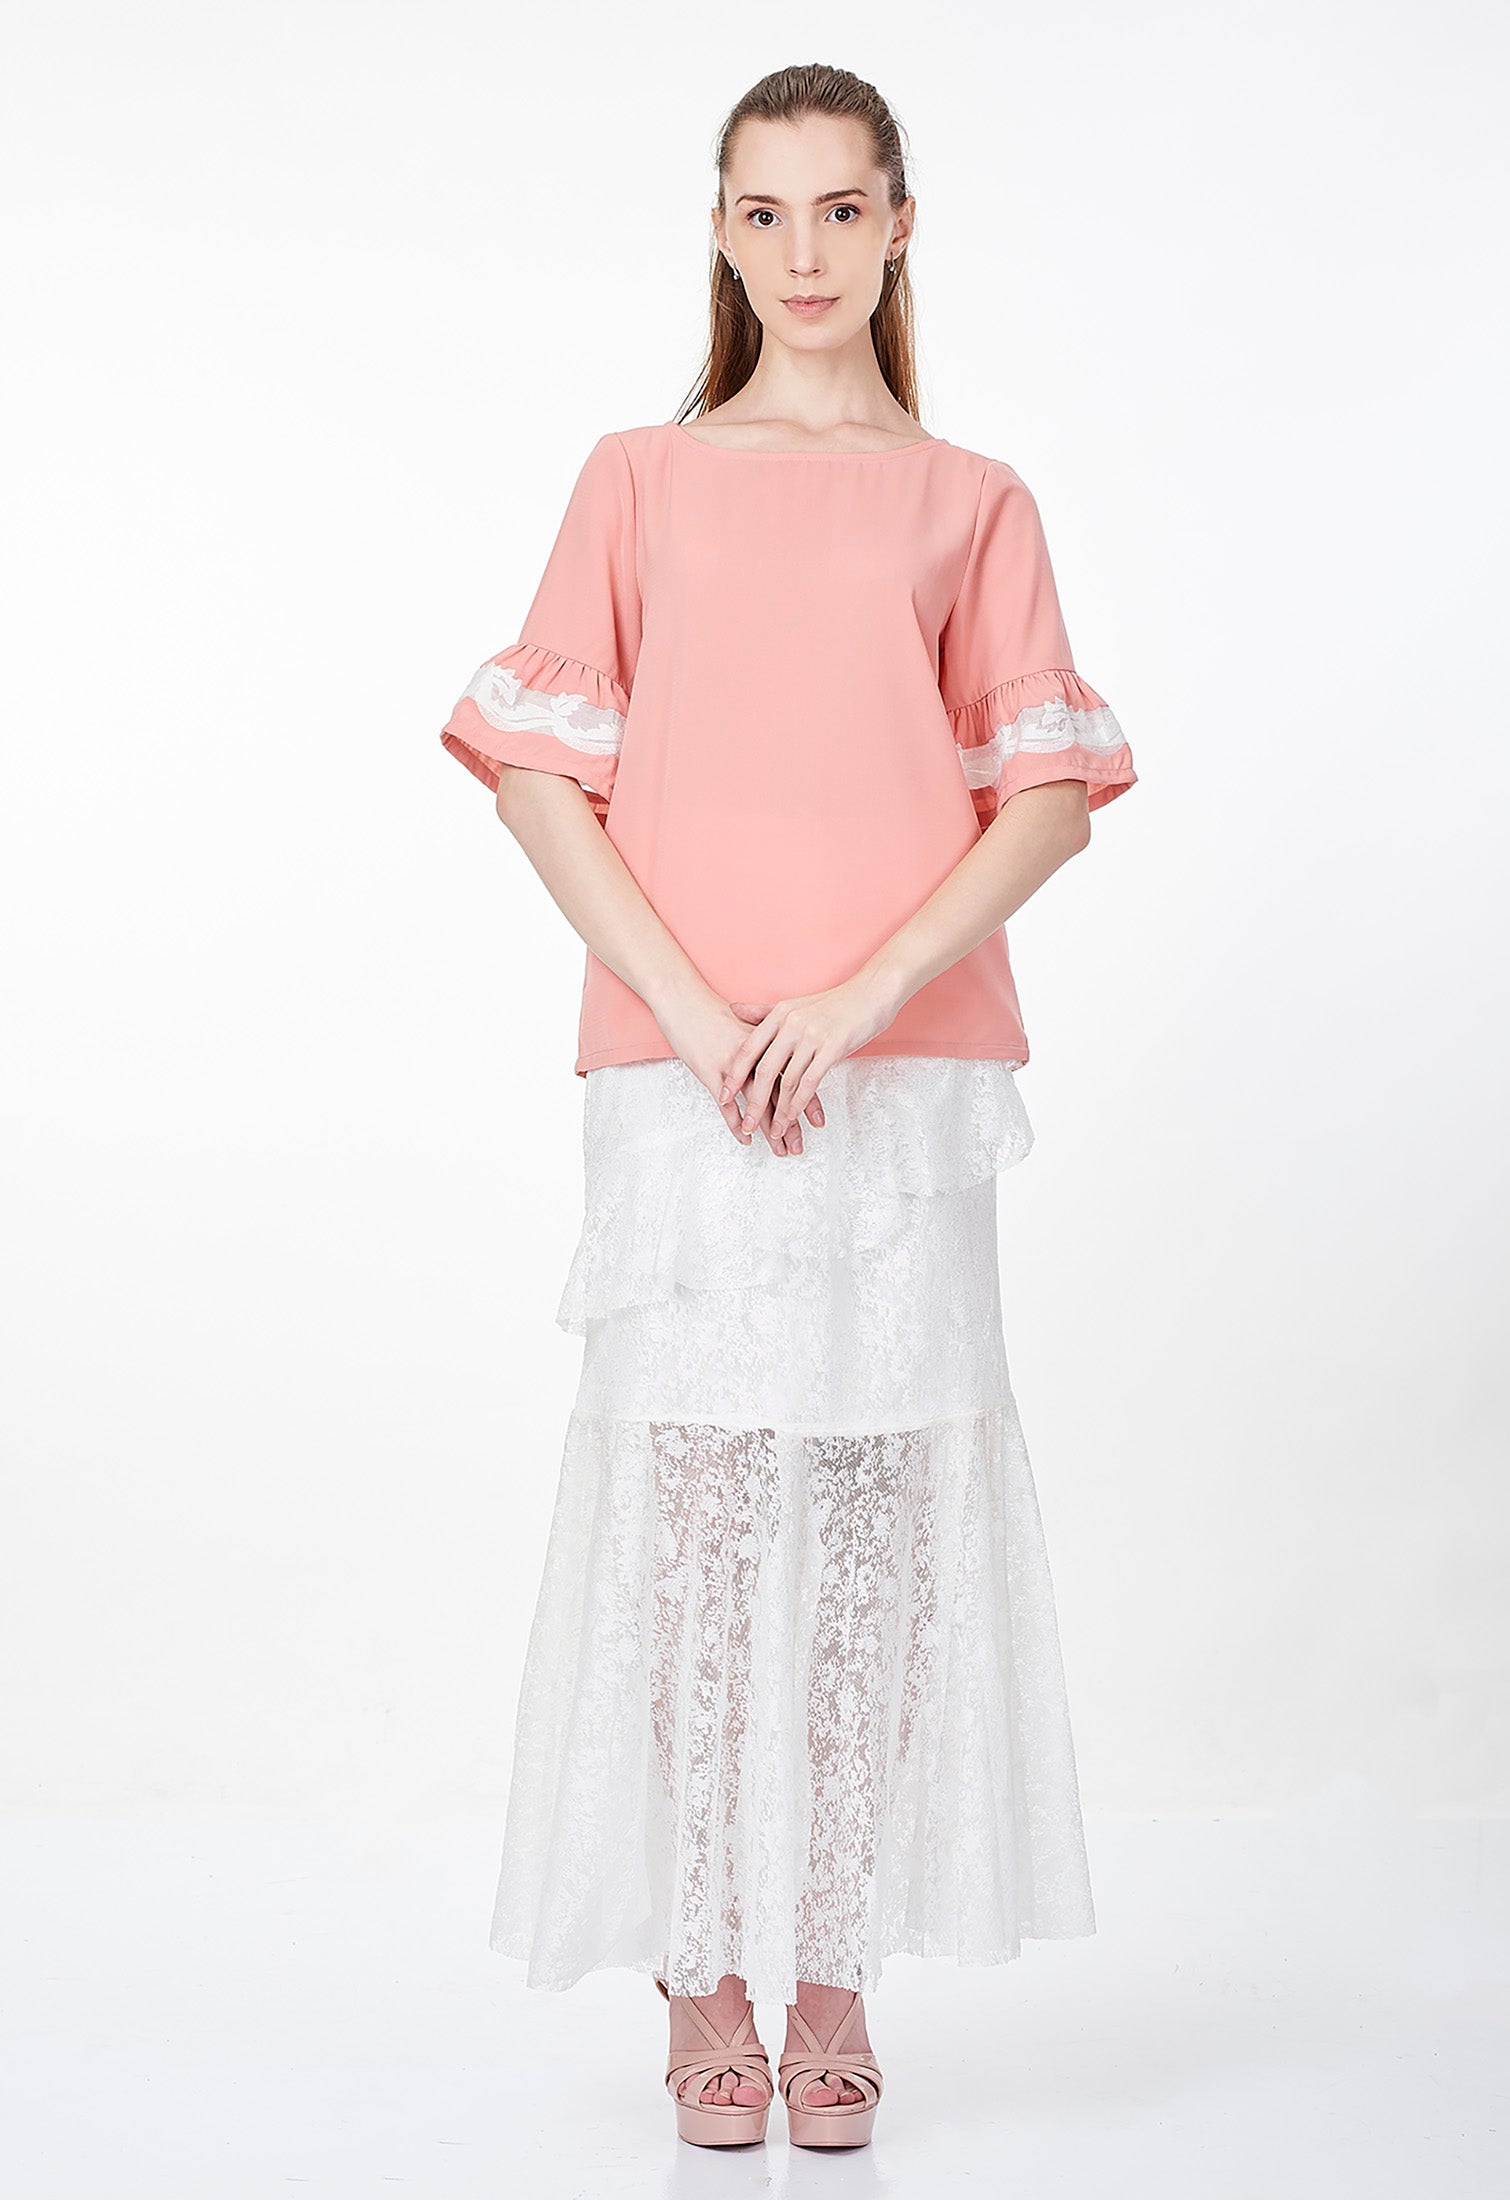 Ruffled Sleeve with Lace Blouse